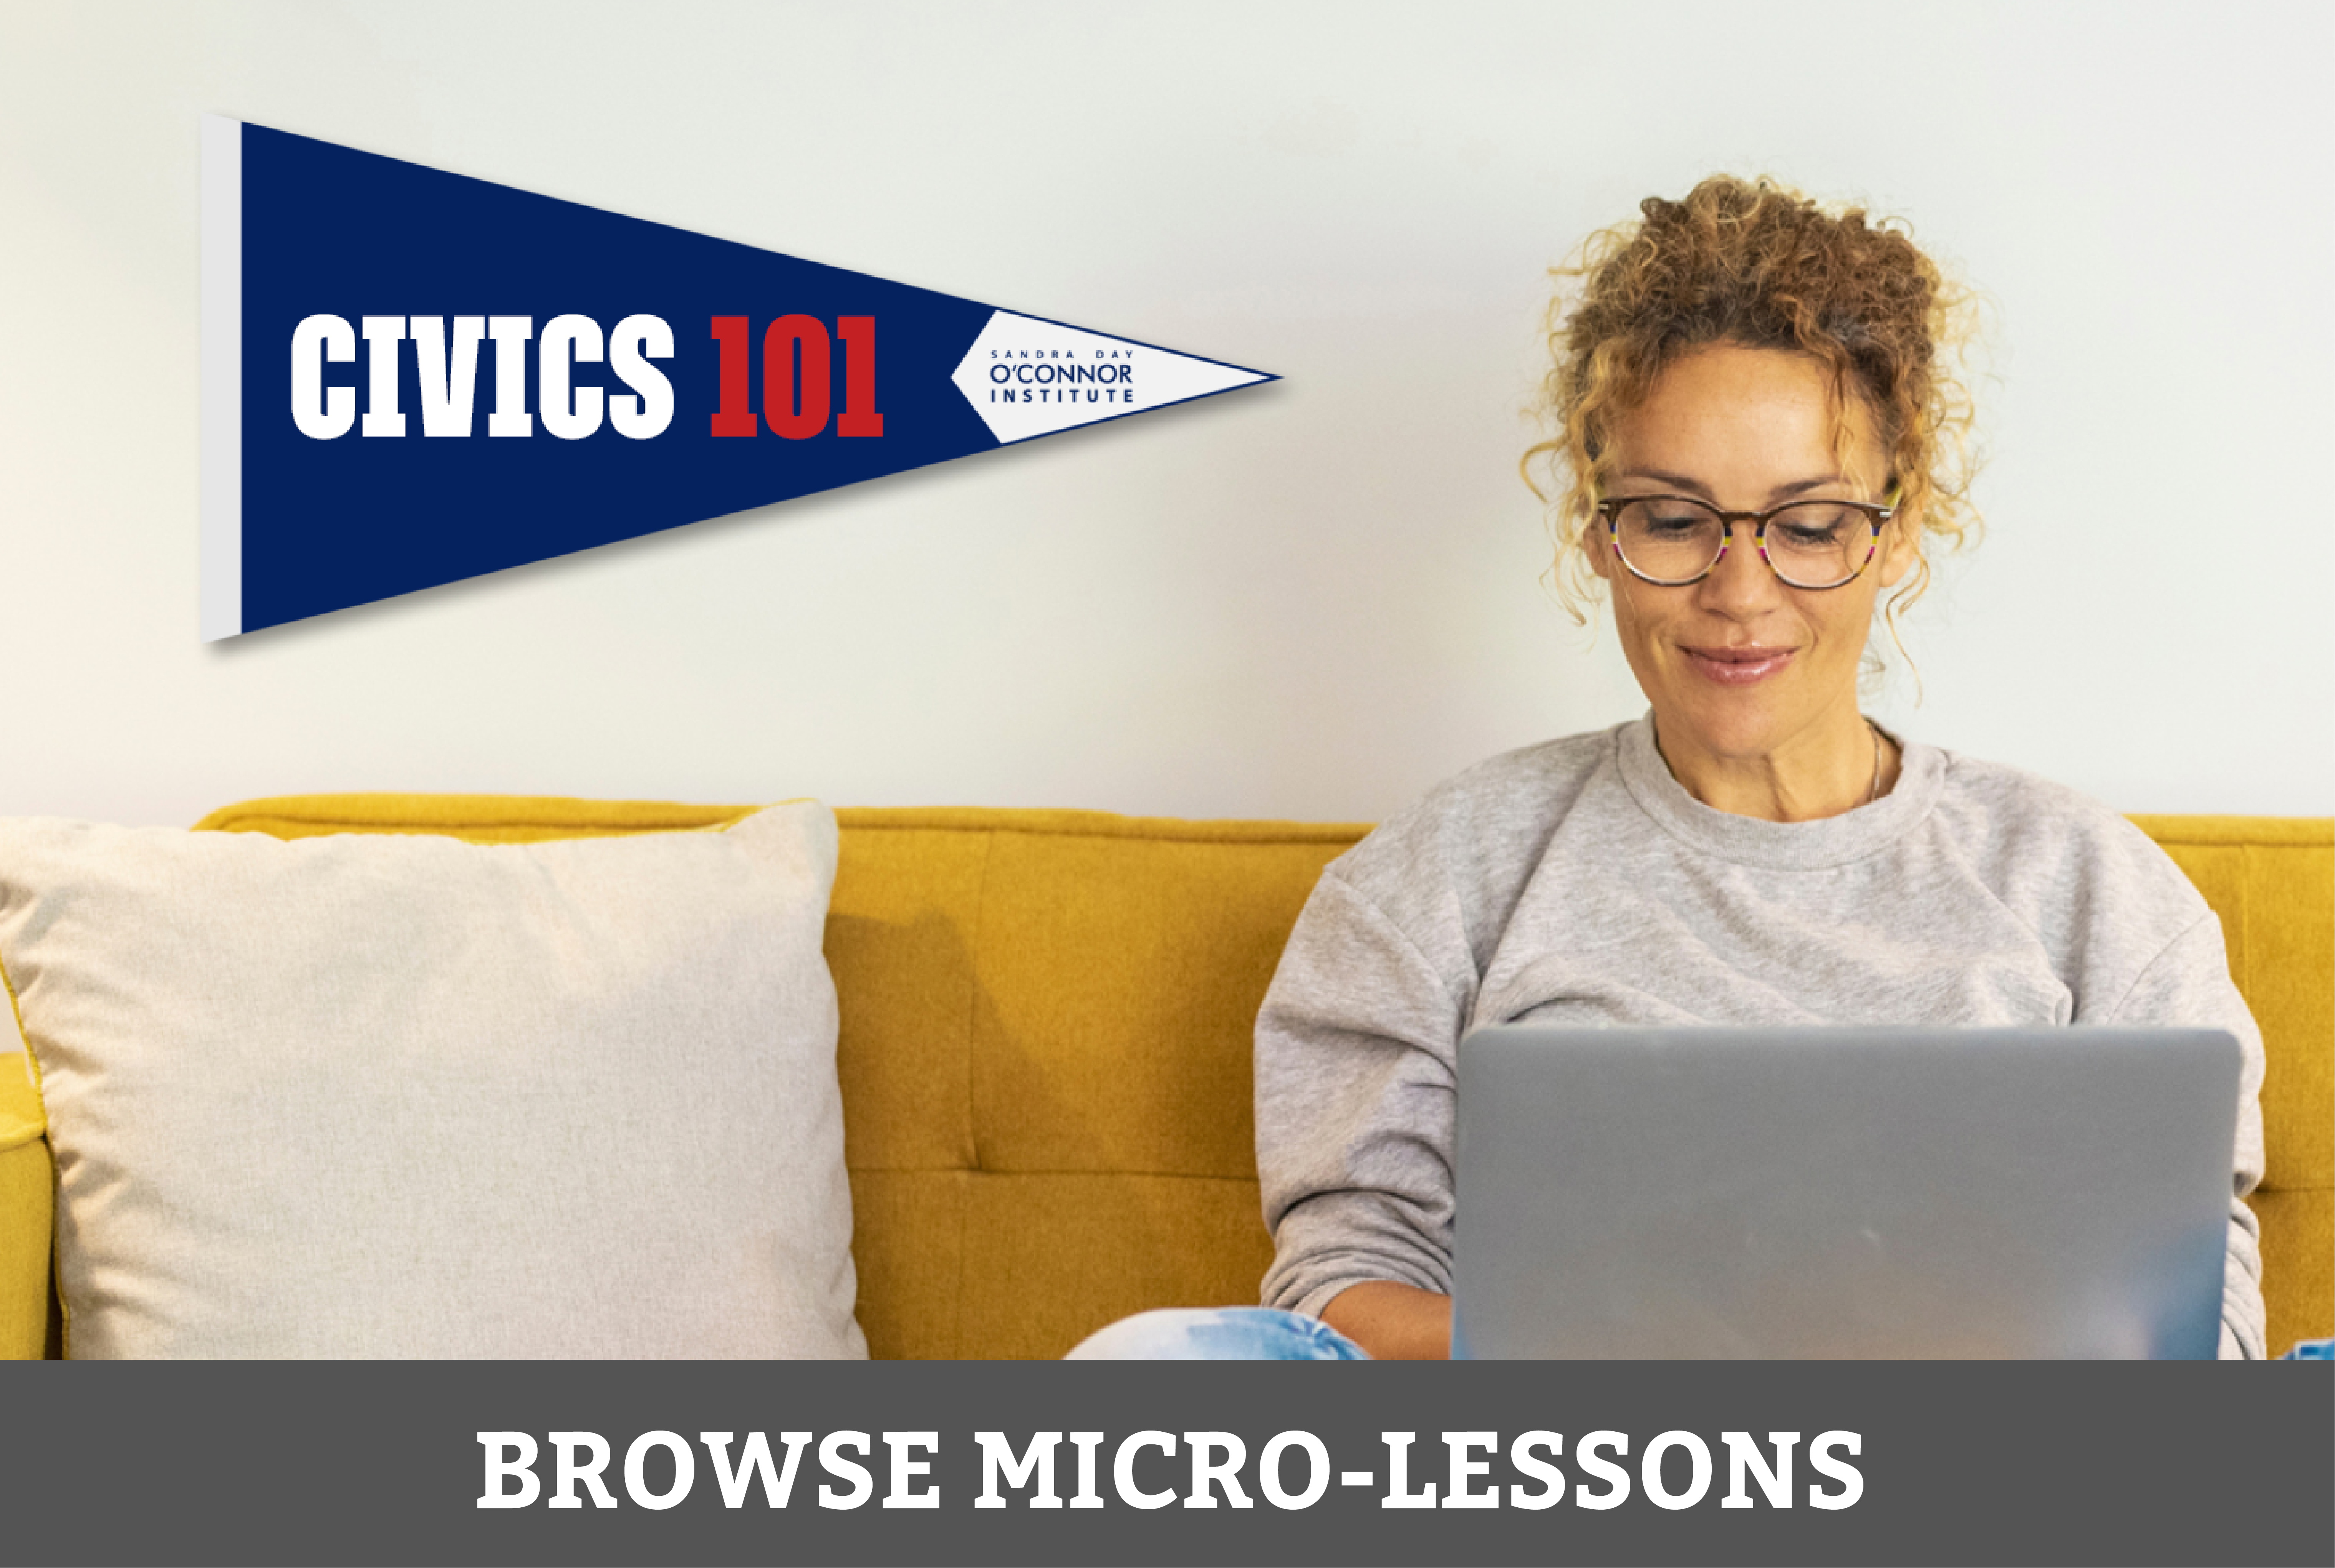 Woman sitting on a couch with a laptop on her lap. Civics 101 logo on the wall next to her. Button to click to get to micro-lessons